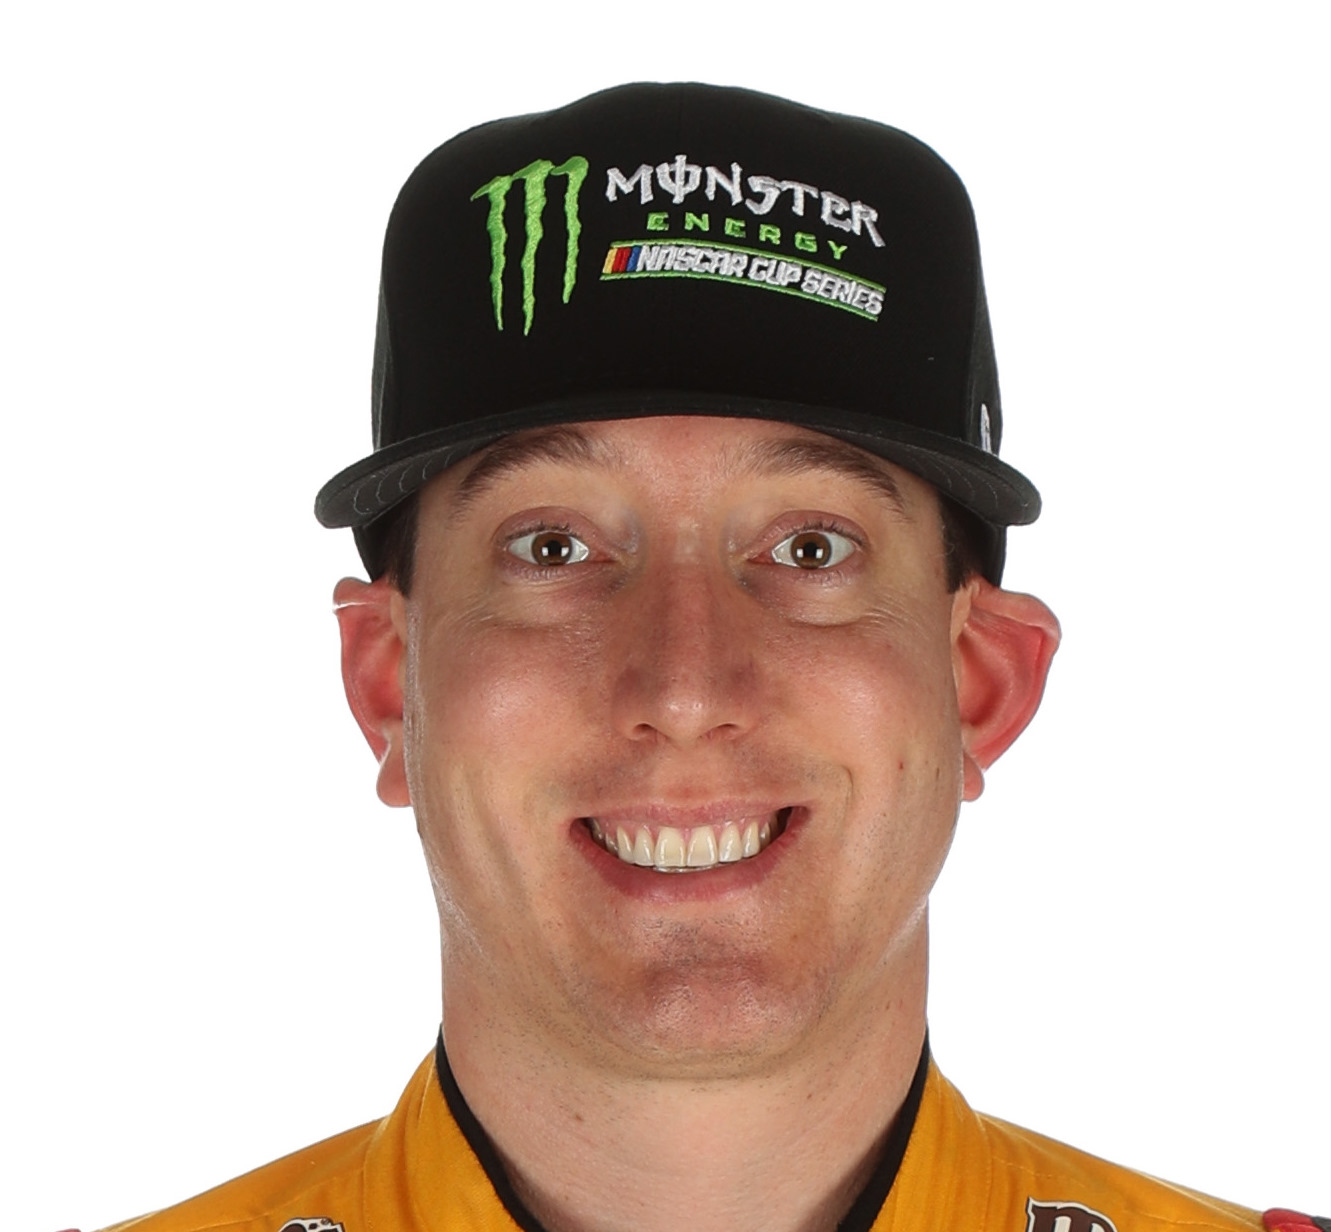 Kyle Busch - the only thing that should be suspended is this photo from NASCAR's official 2017 driver mugs. He looks like a goofball!